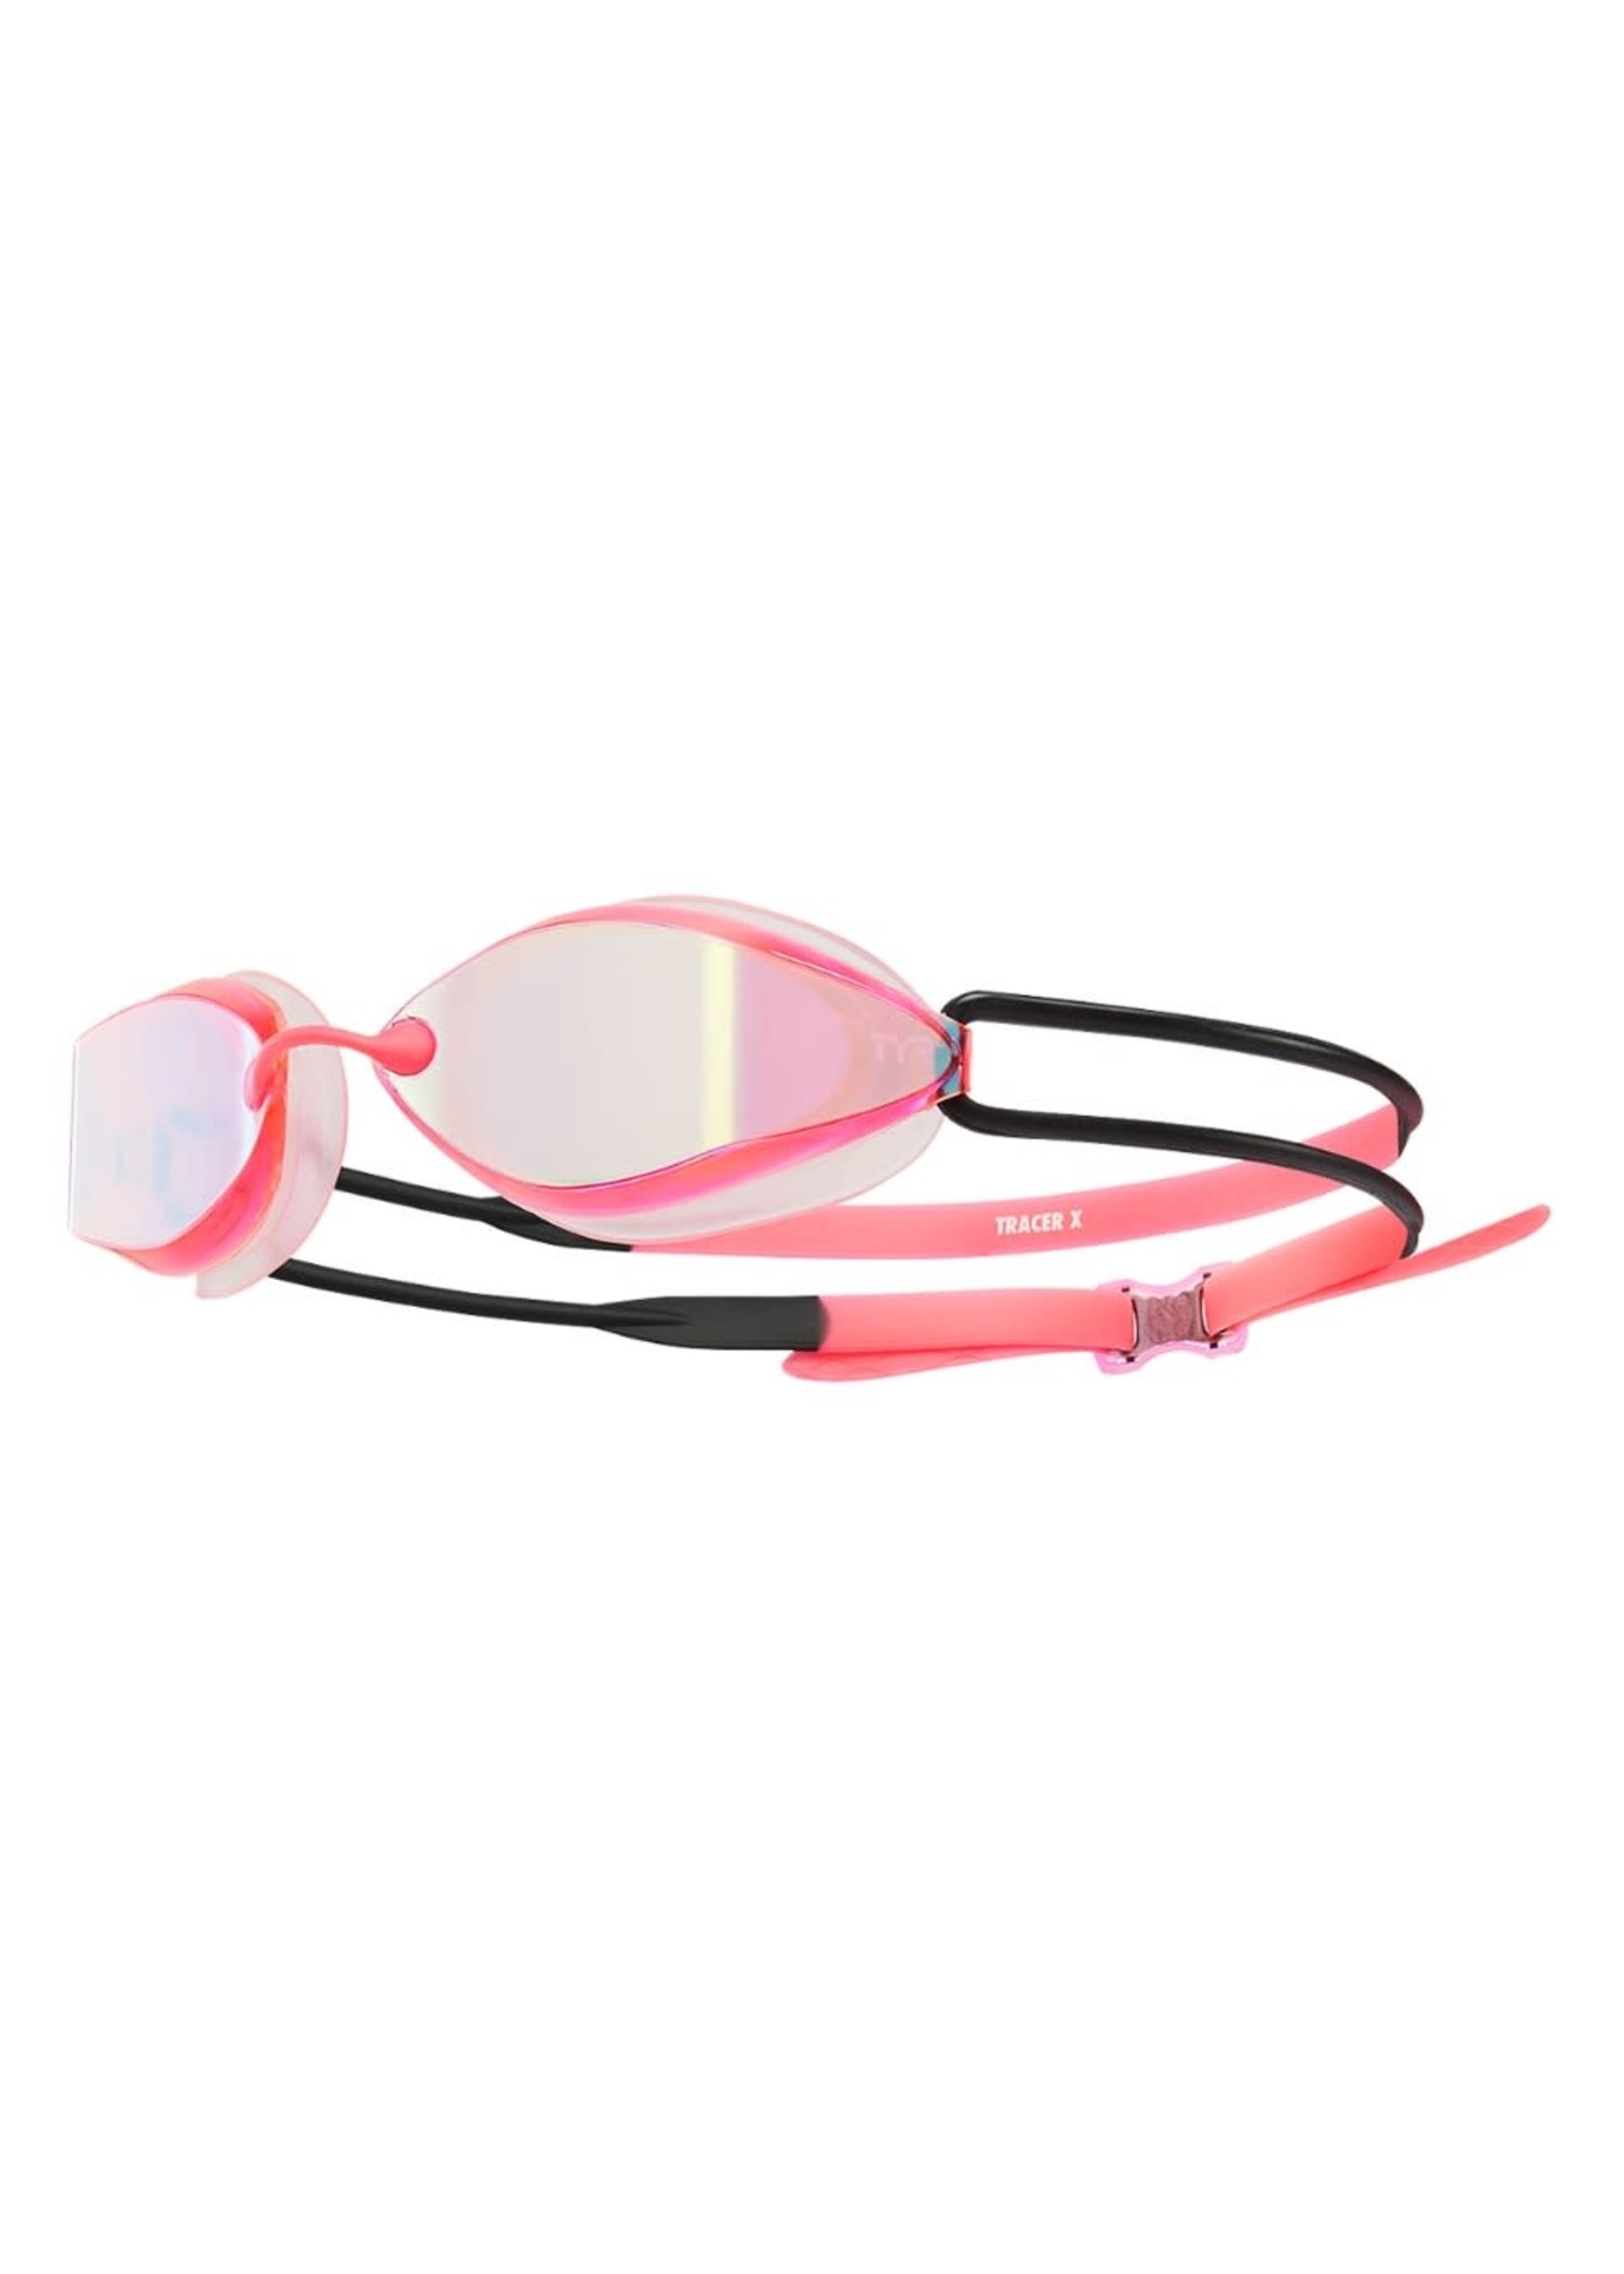 TYR TRACER X RACING MIRR PINK/BLK ALL